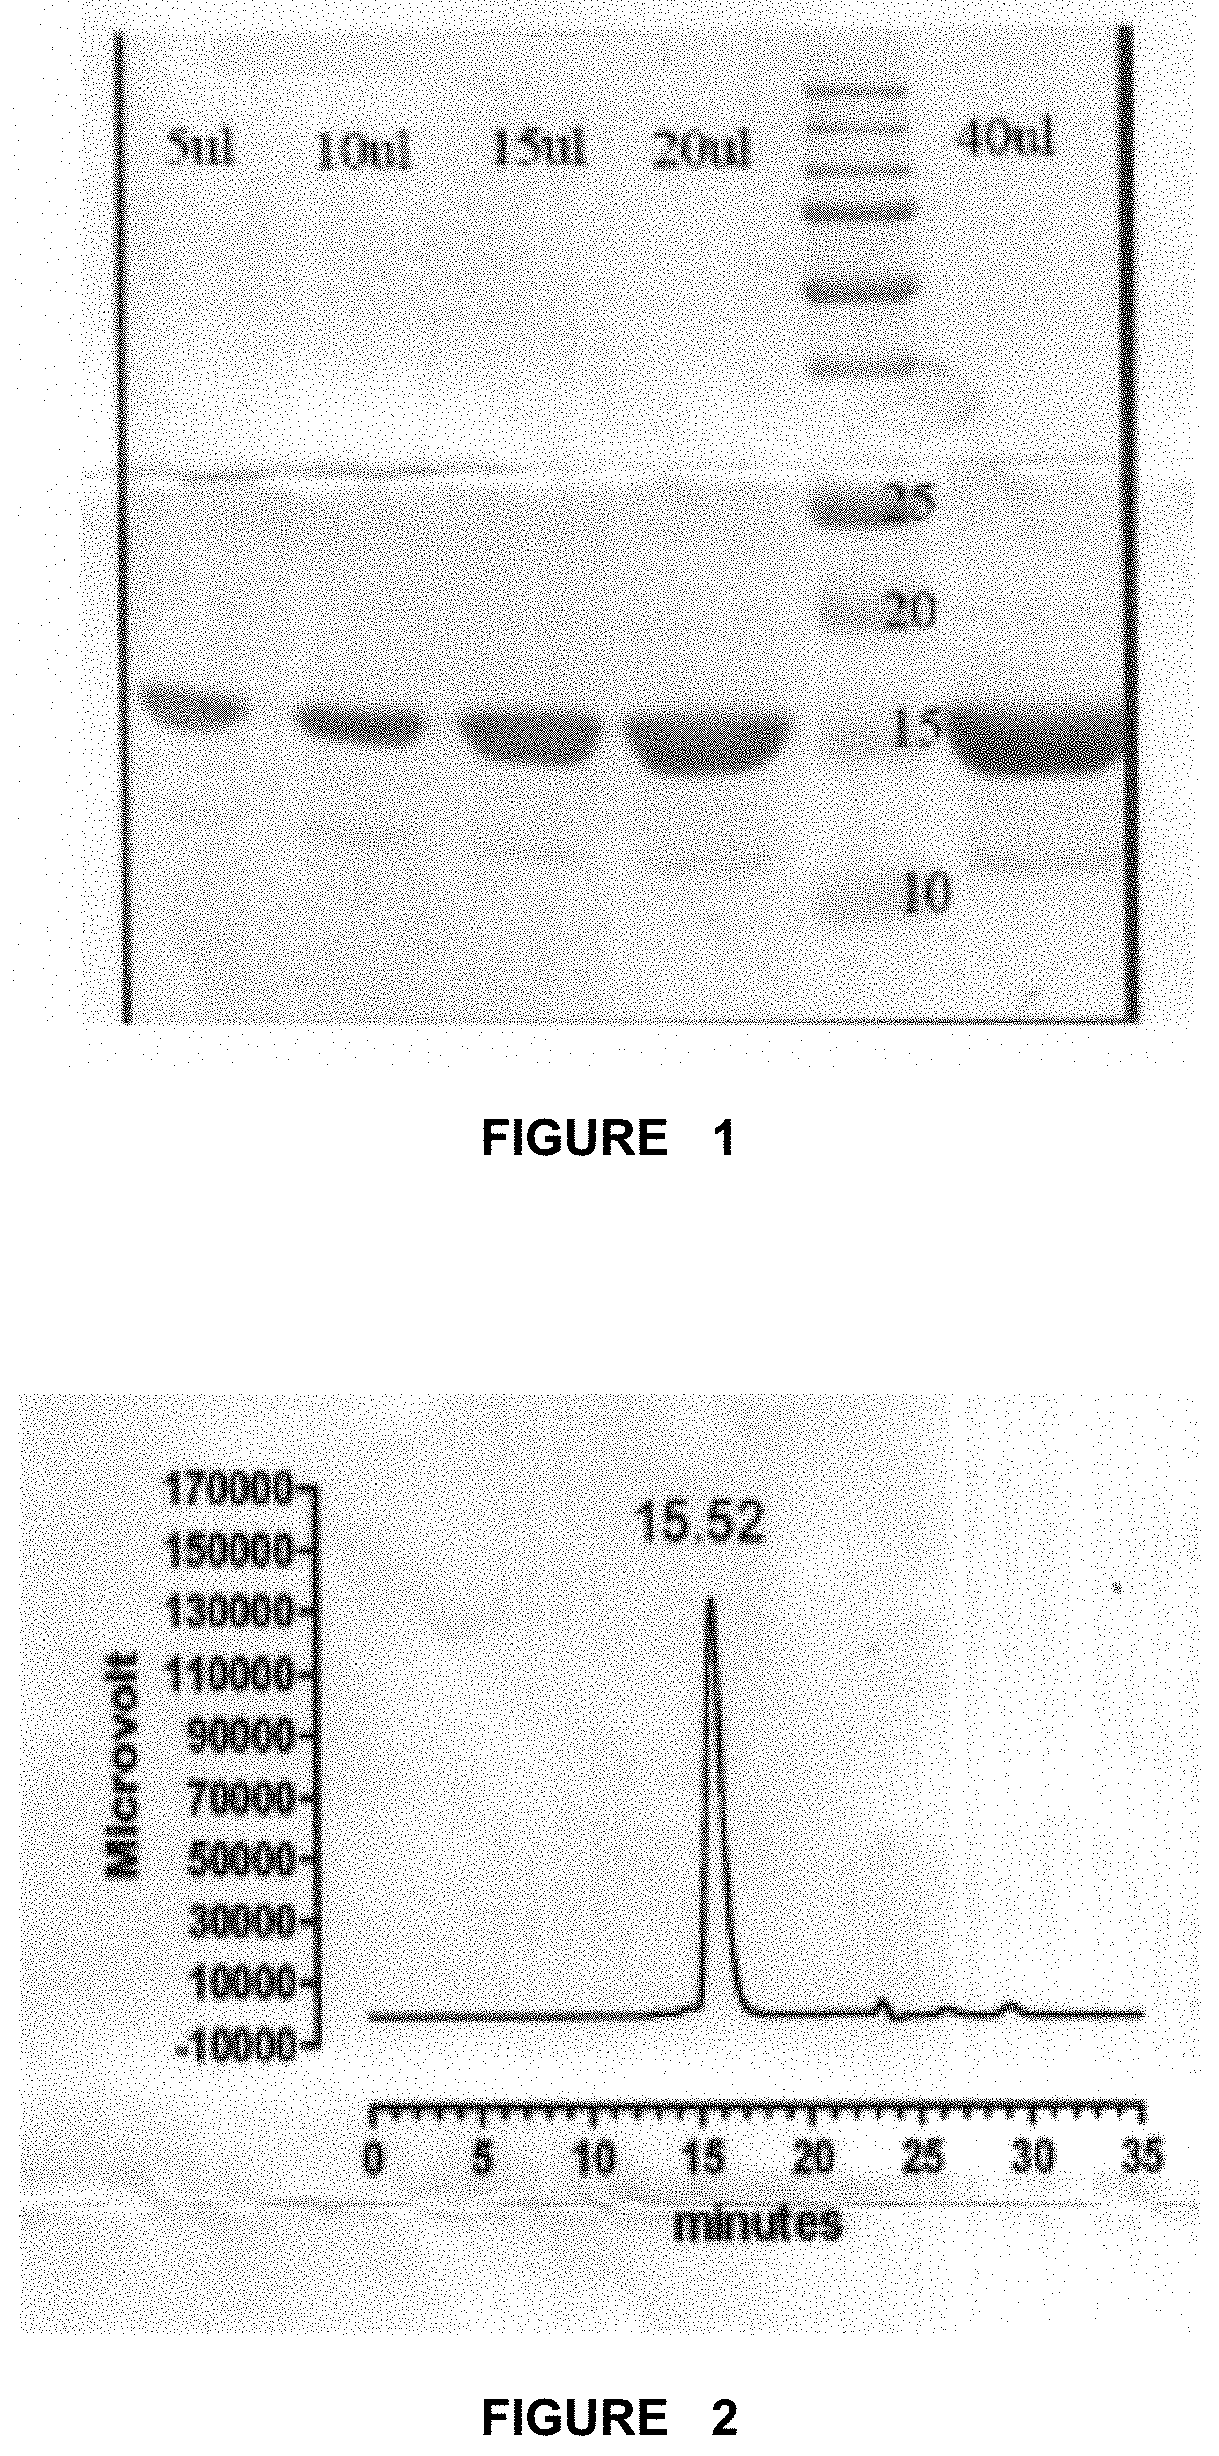 Method of treating overweight or obesity comprising administering a pleurotus ostreatus mushroom extract or a composition comprising a pleurotus ostretus mushroom extract